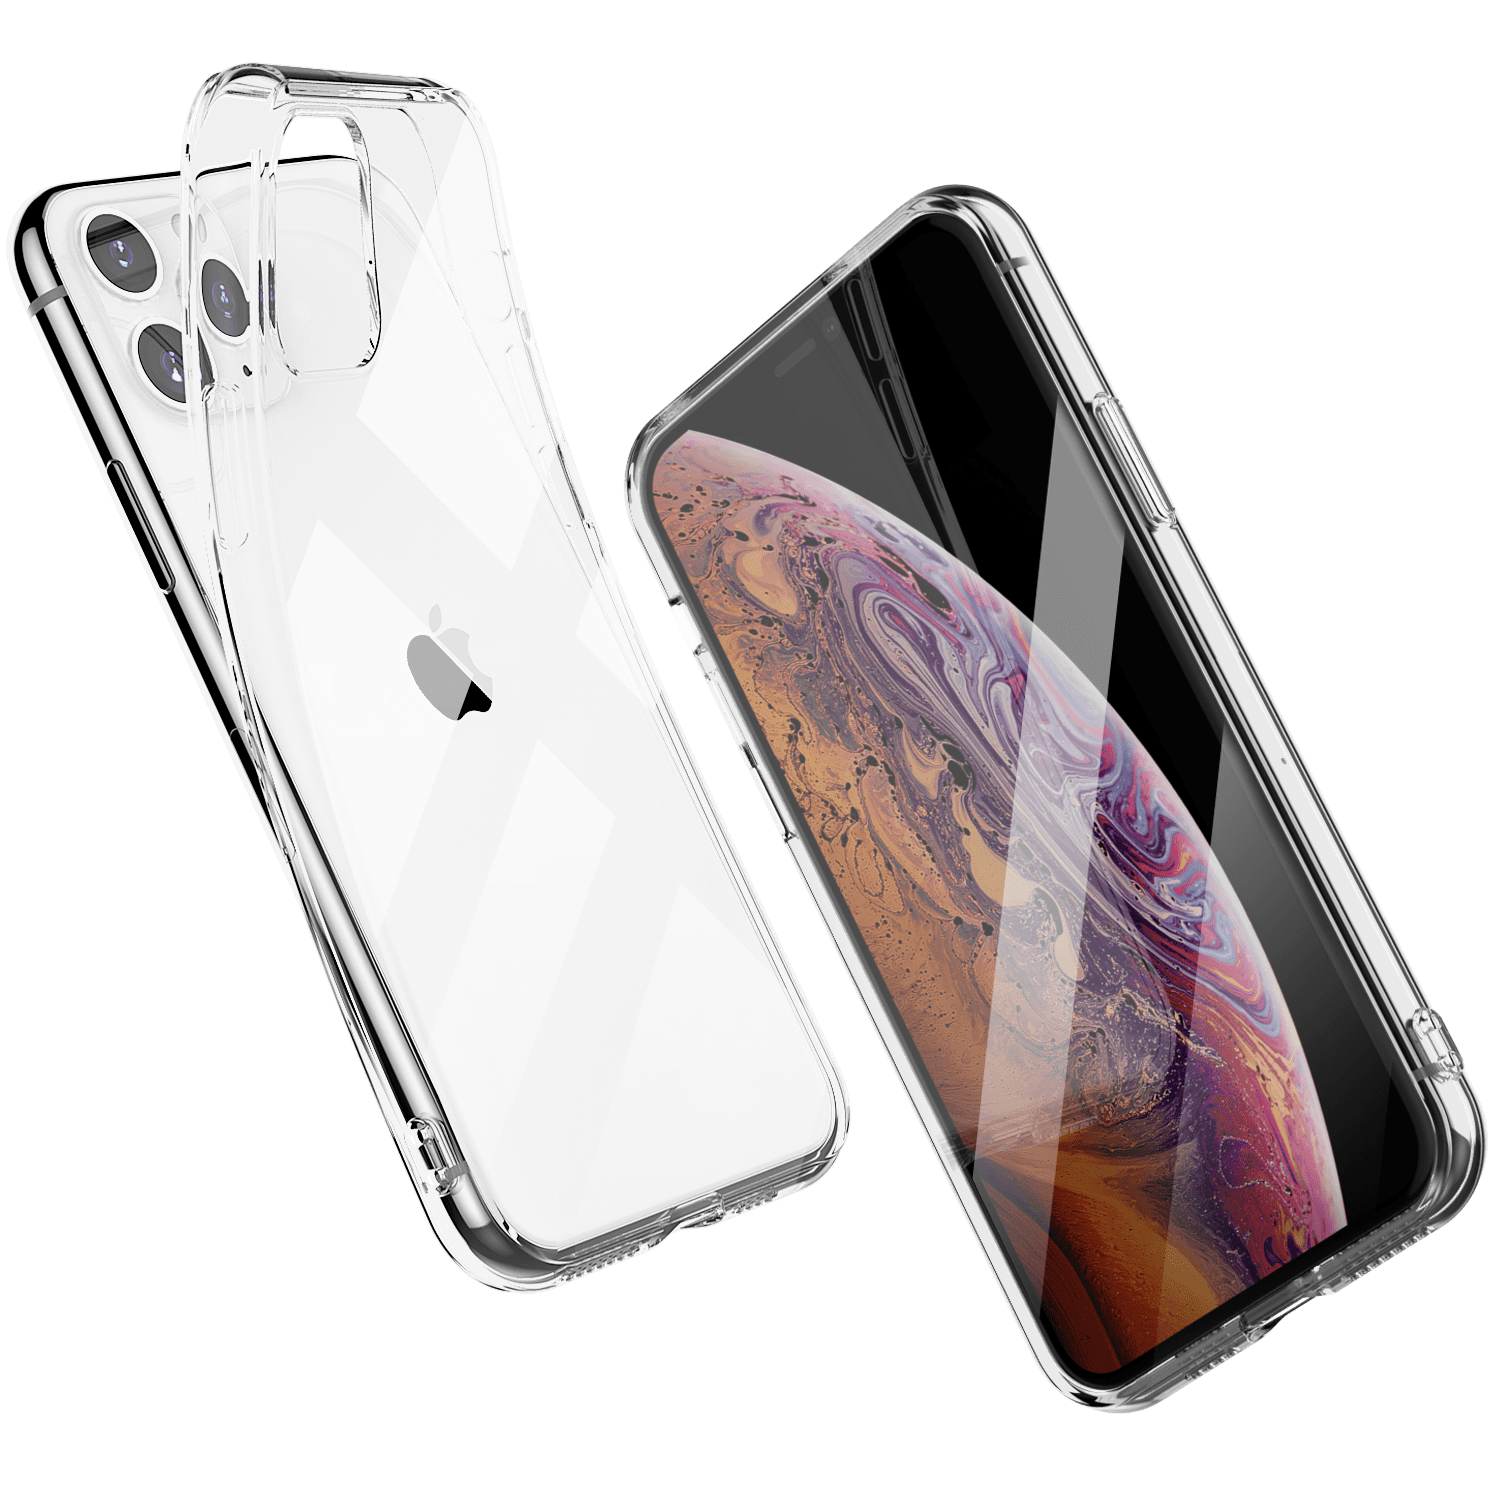 Shamos Case For Iphone 11 Pro Max Clear Soft Transparent Cover Tpu